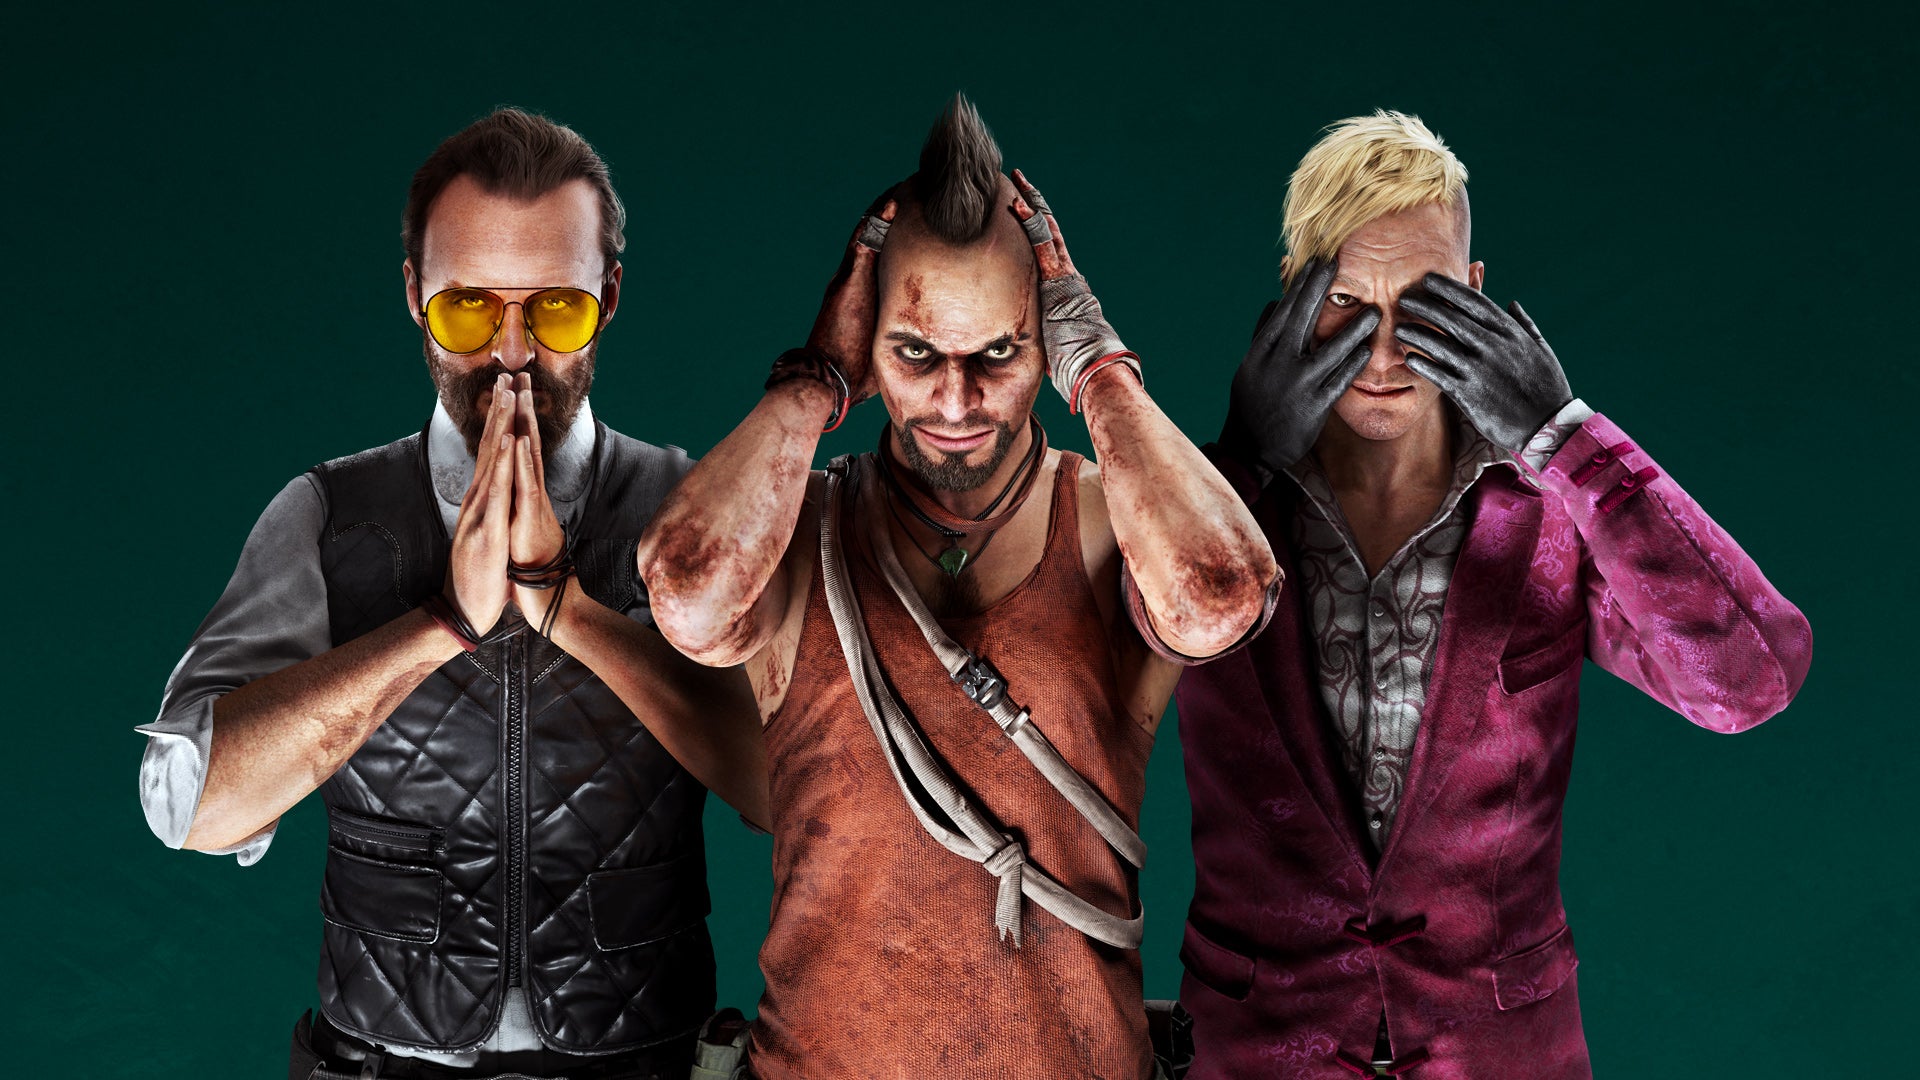 gaming An image showing the villains from Far Cry 3, 4 and 5, who return in Far Cry 6's season pass.